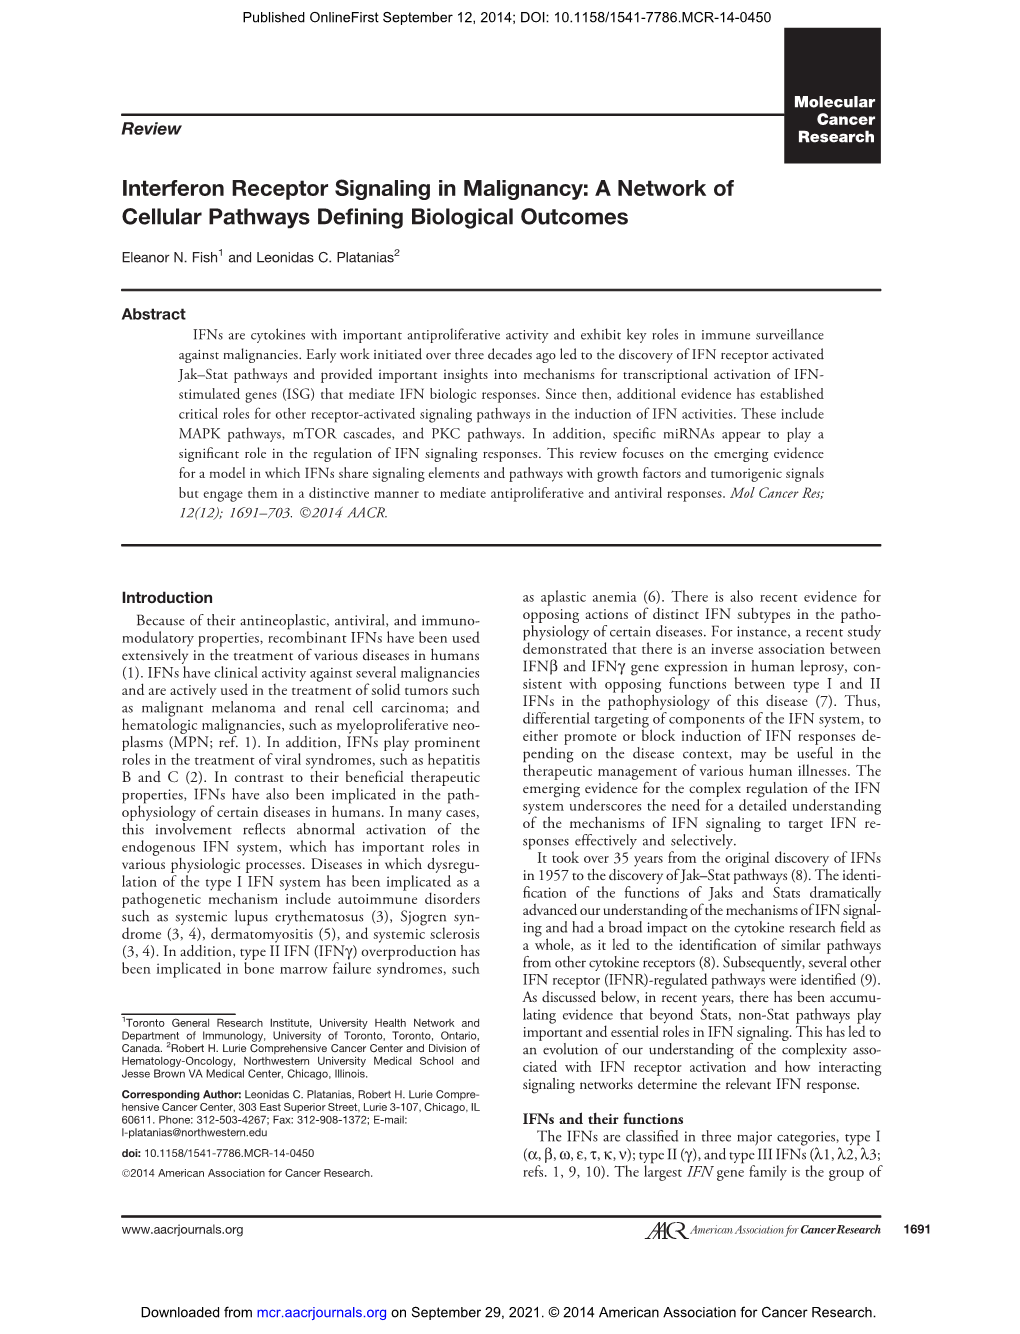 Interferon Receptor Signaling in Malignancy: a Network of Cellular Pathways Deﬁning Biological Outcomes